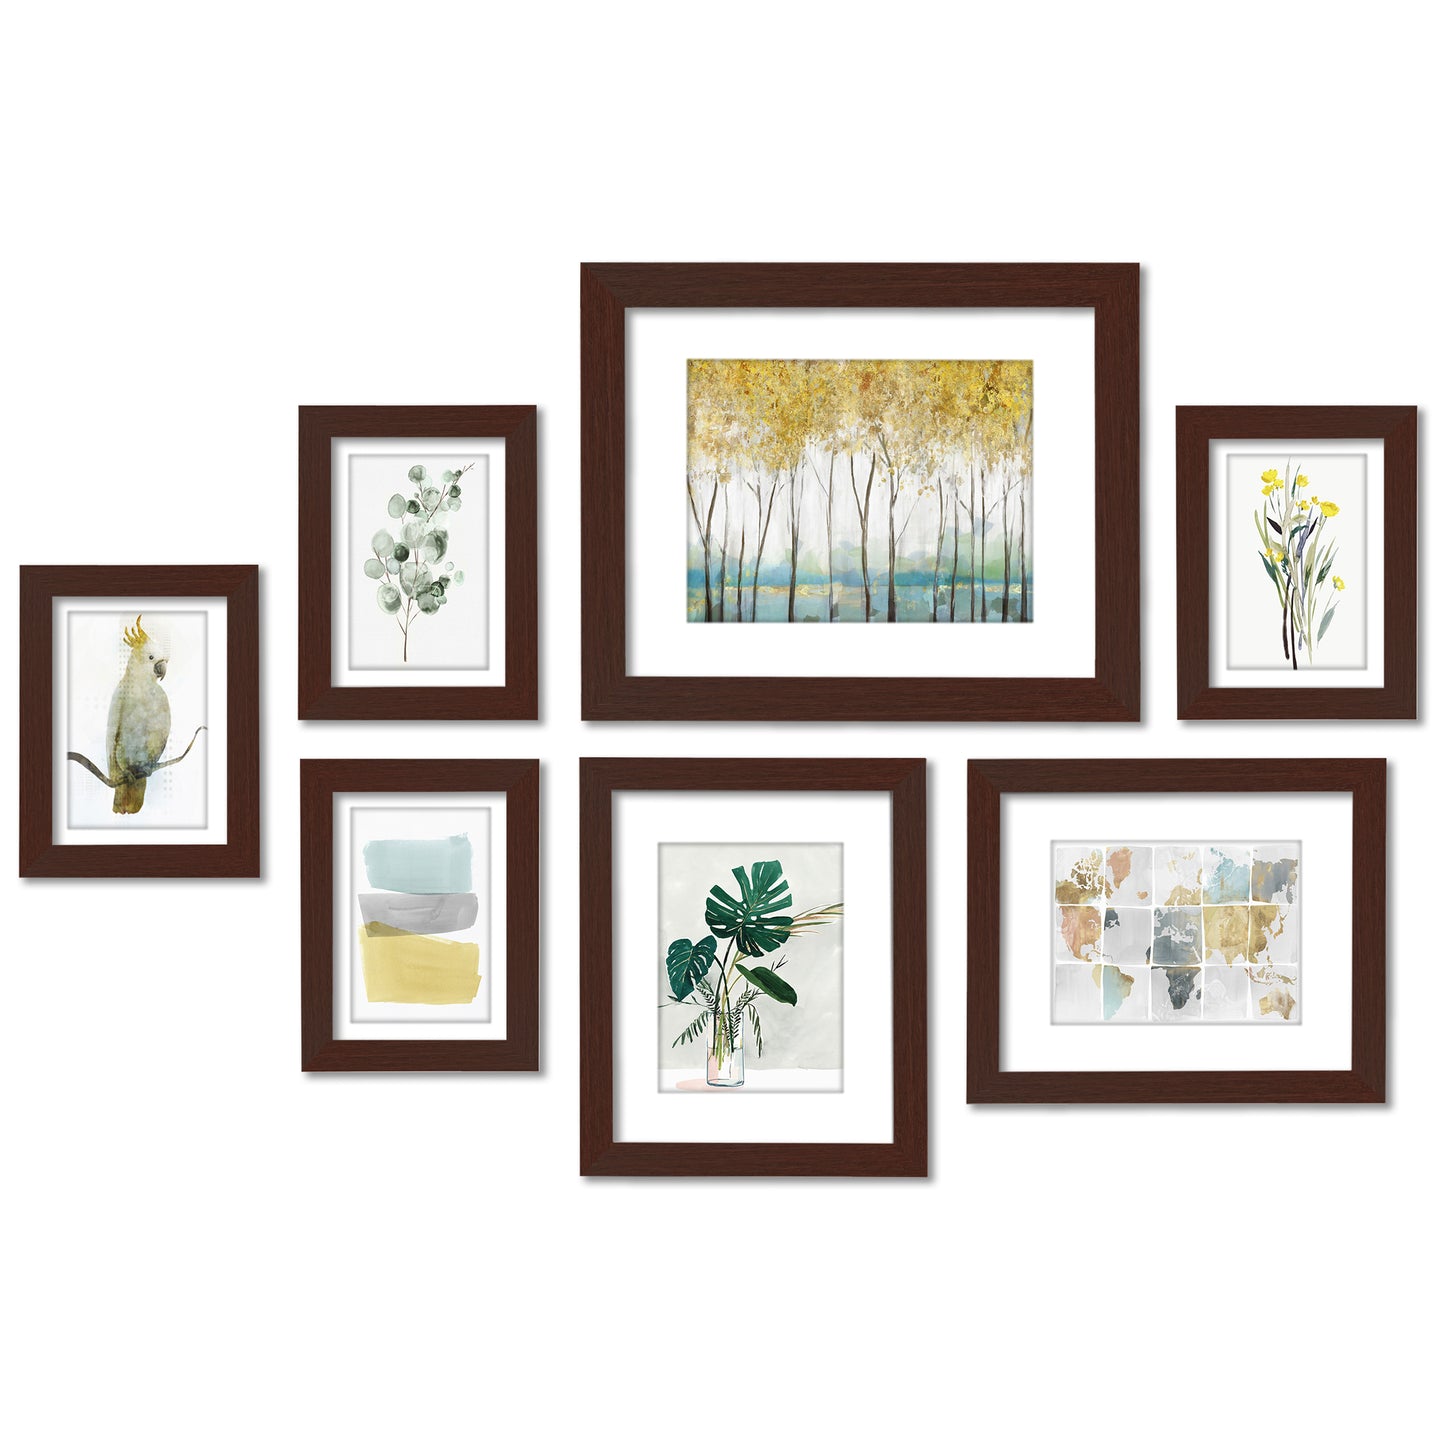 Watercolor Wanderlust by PI Creative - 7 Piece Framed Gallery Wall Art Set - Americanflat